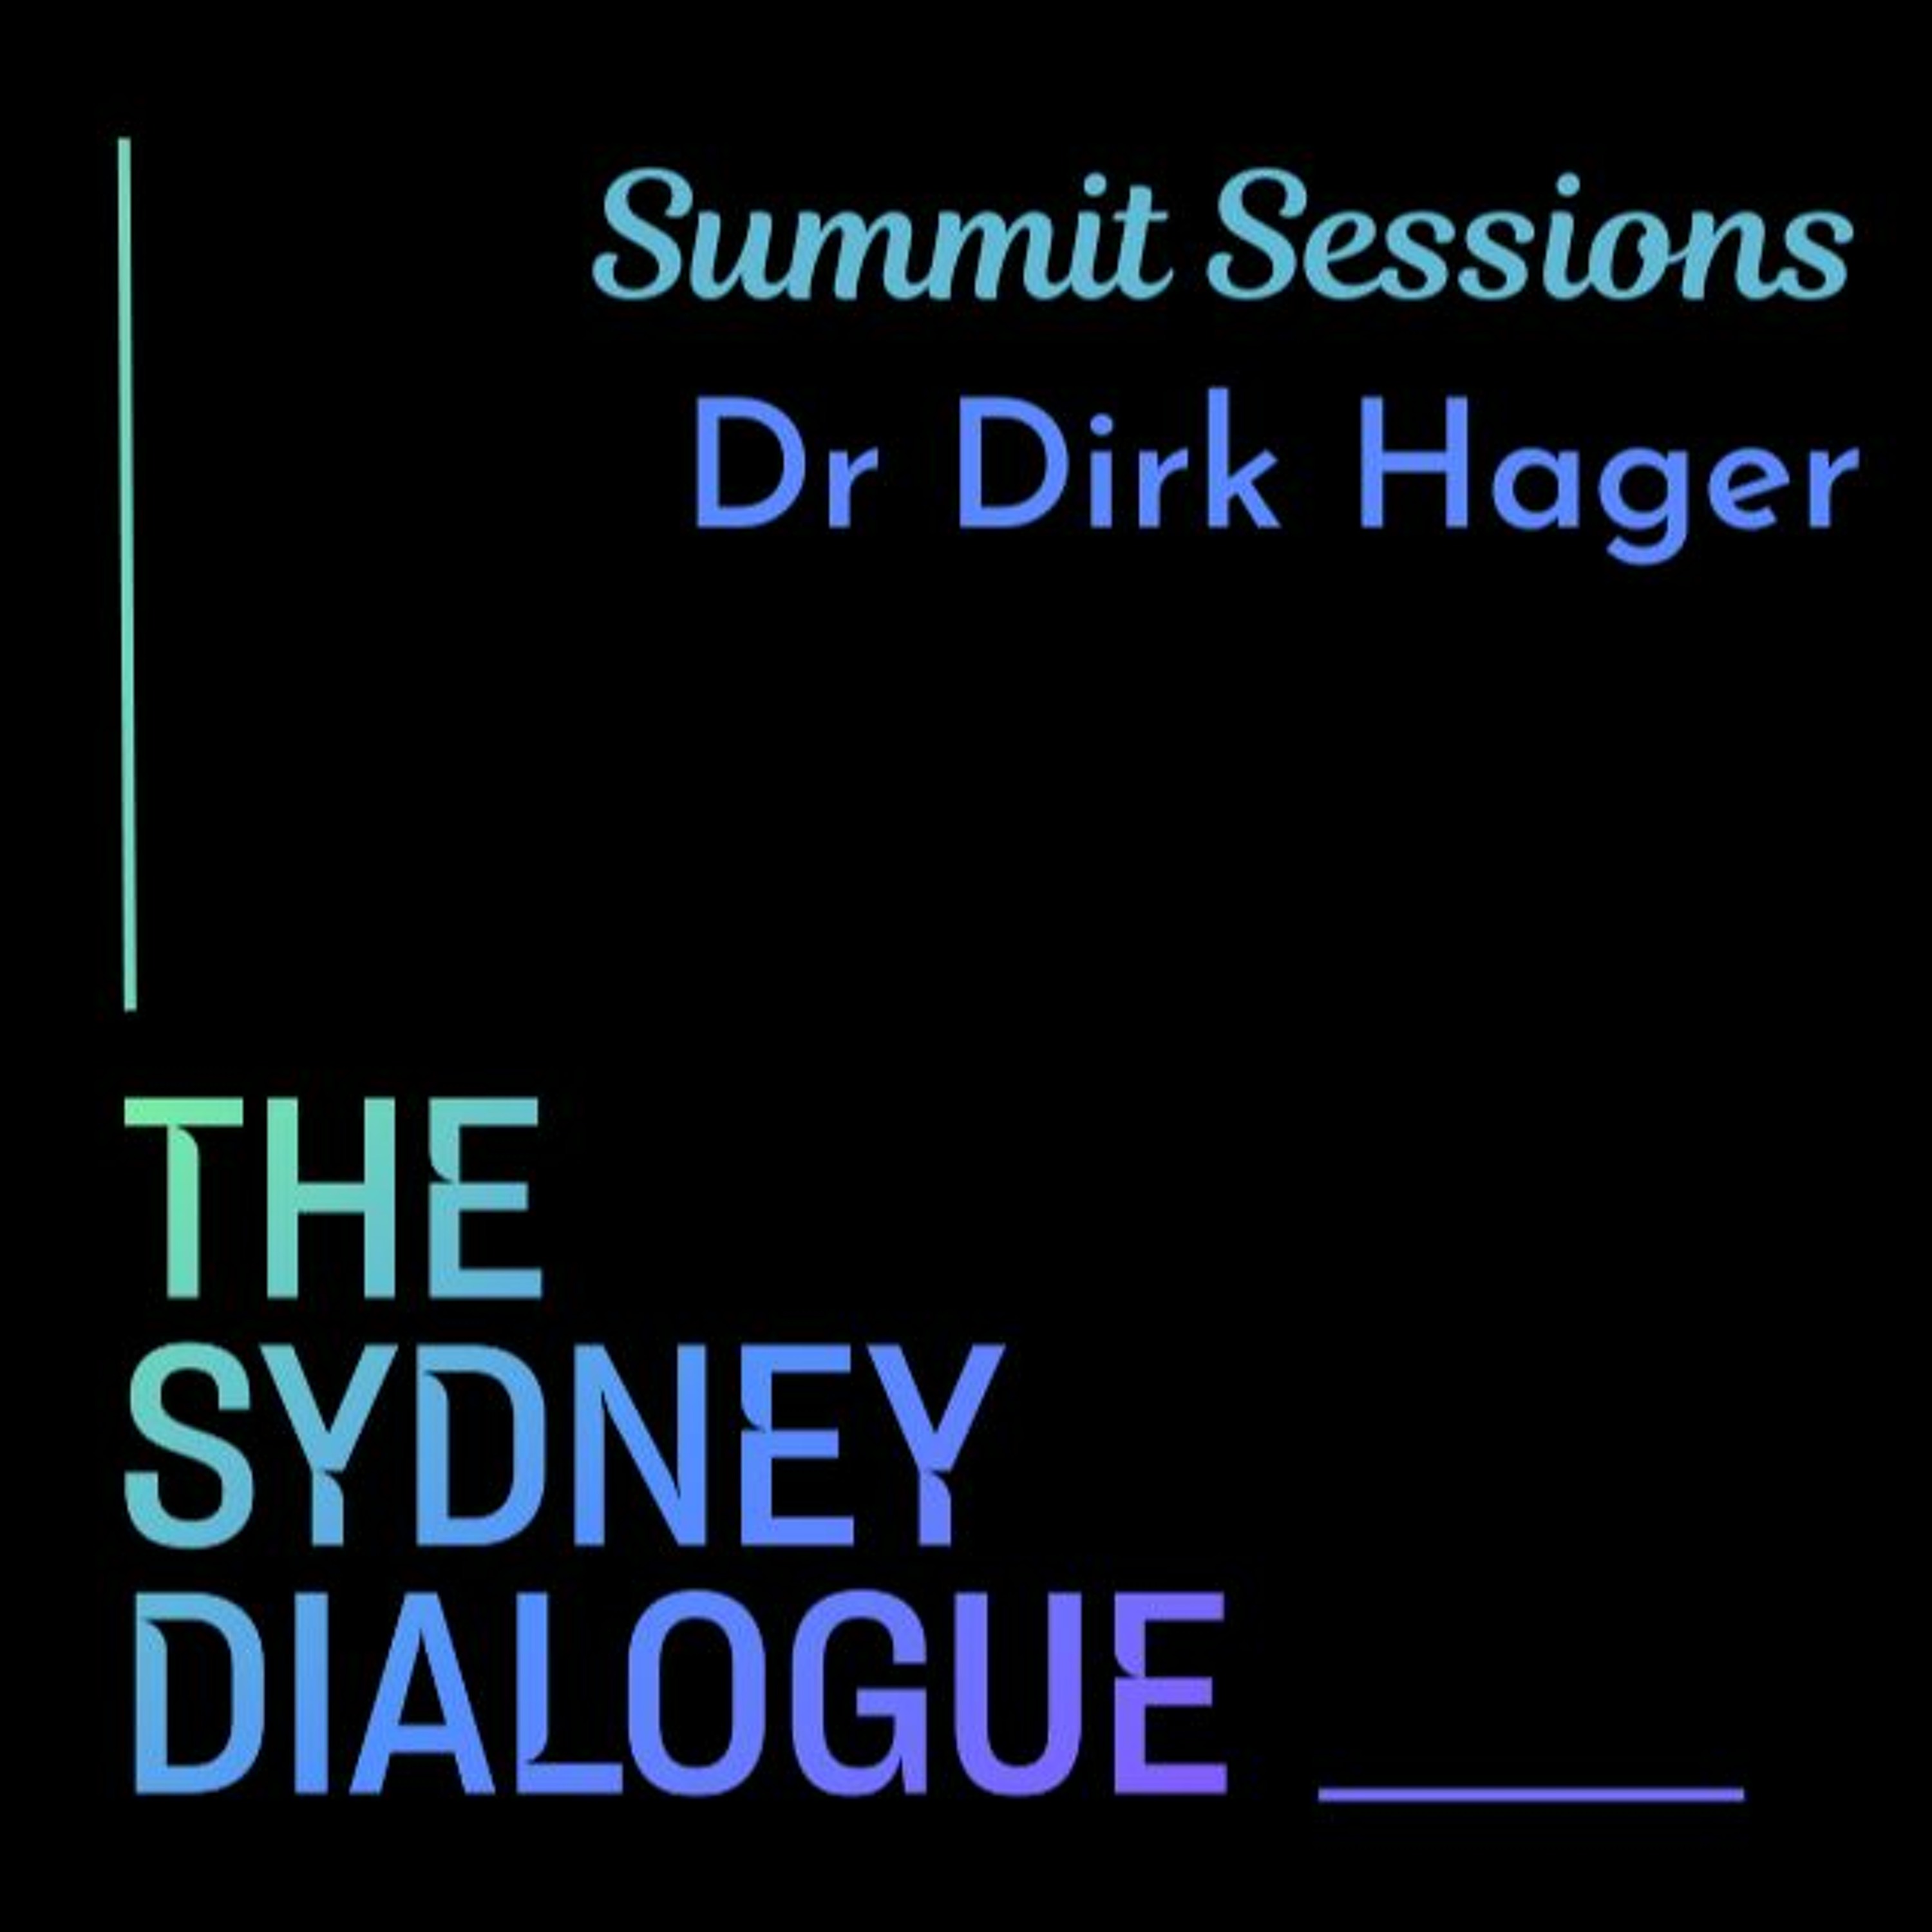 The Sydney Dialogue Summit Sessions: Dr Dirk Hager